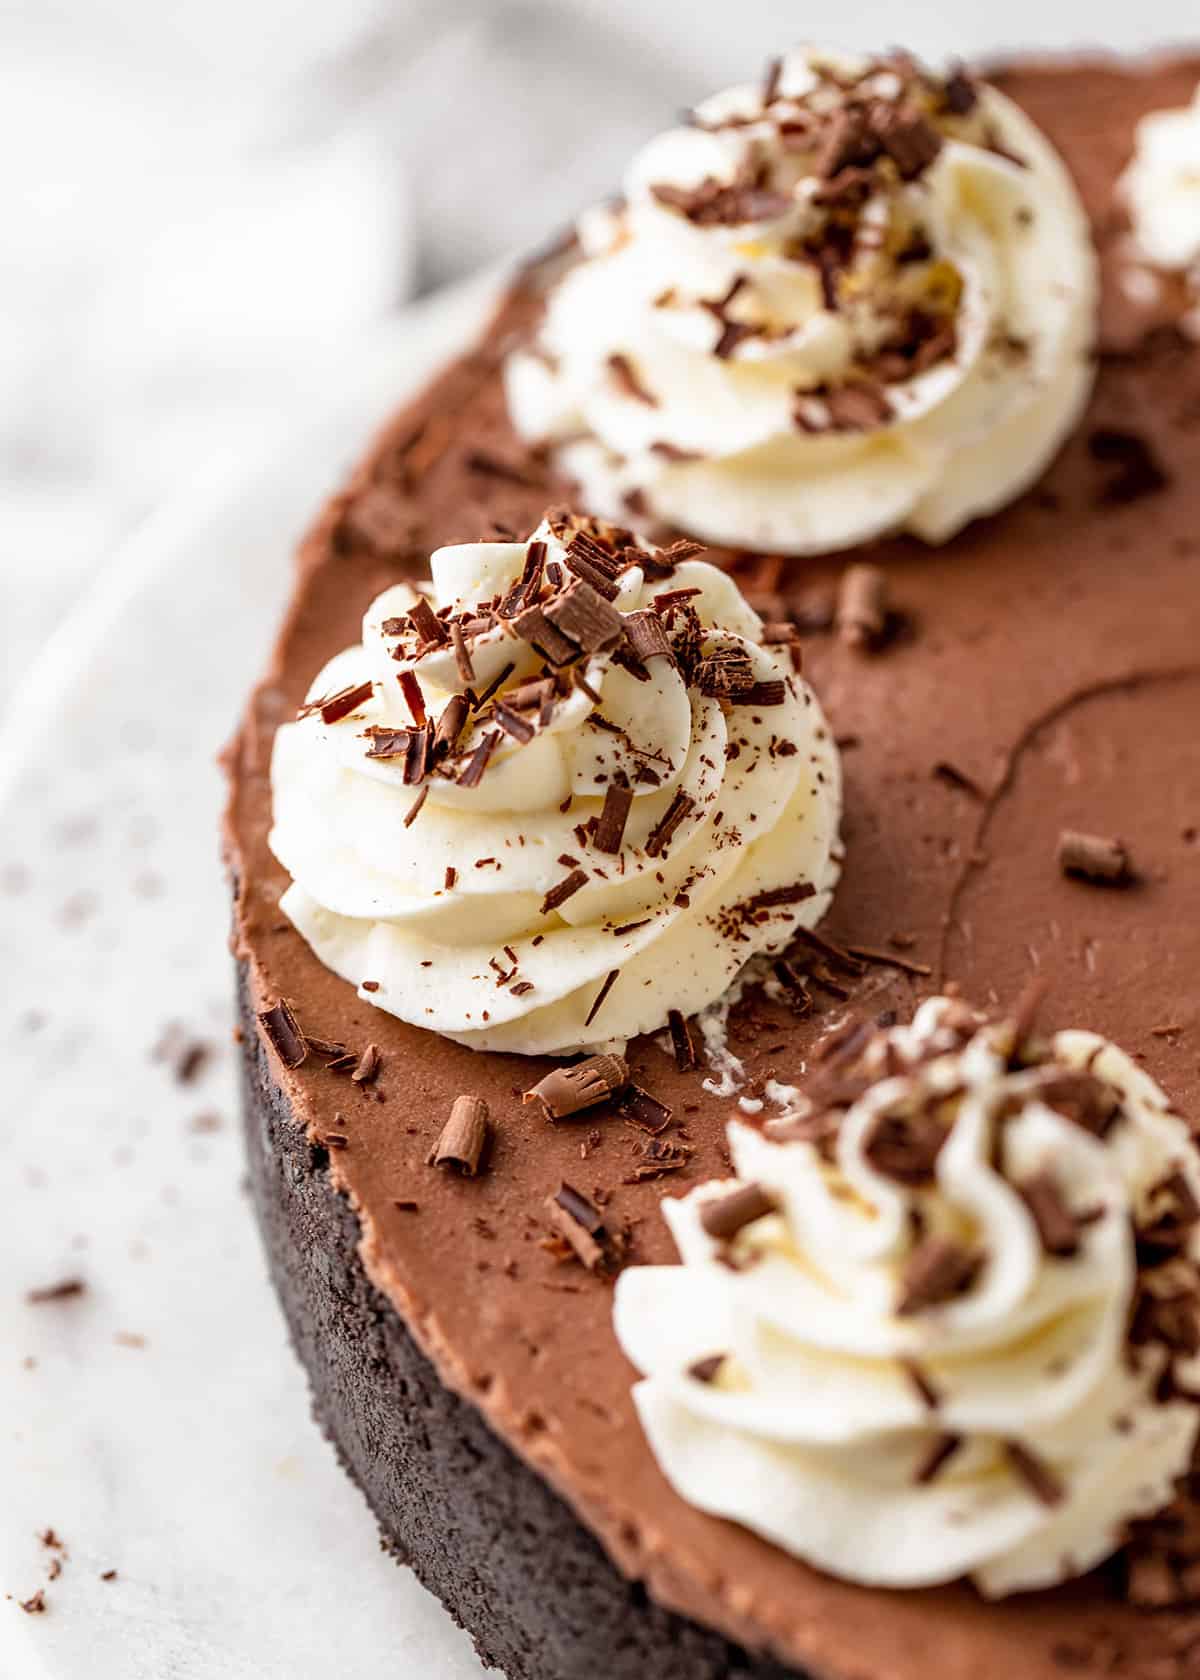 No Bake Chocolate Cheesecake topped with whipped cream and chocolate shavings